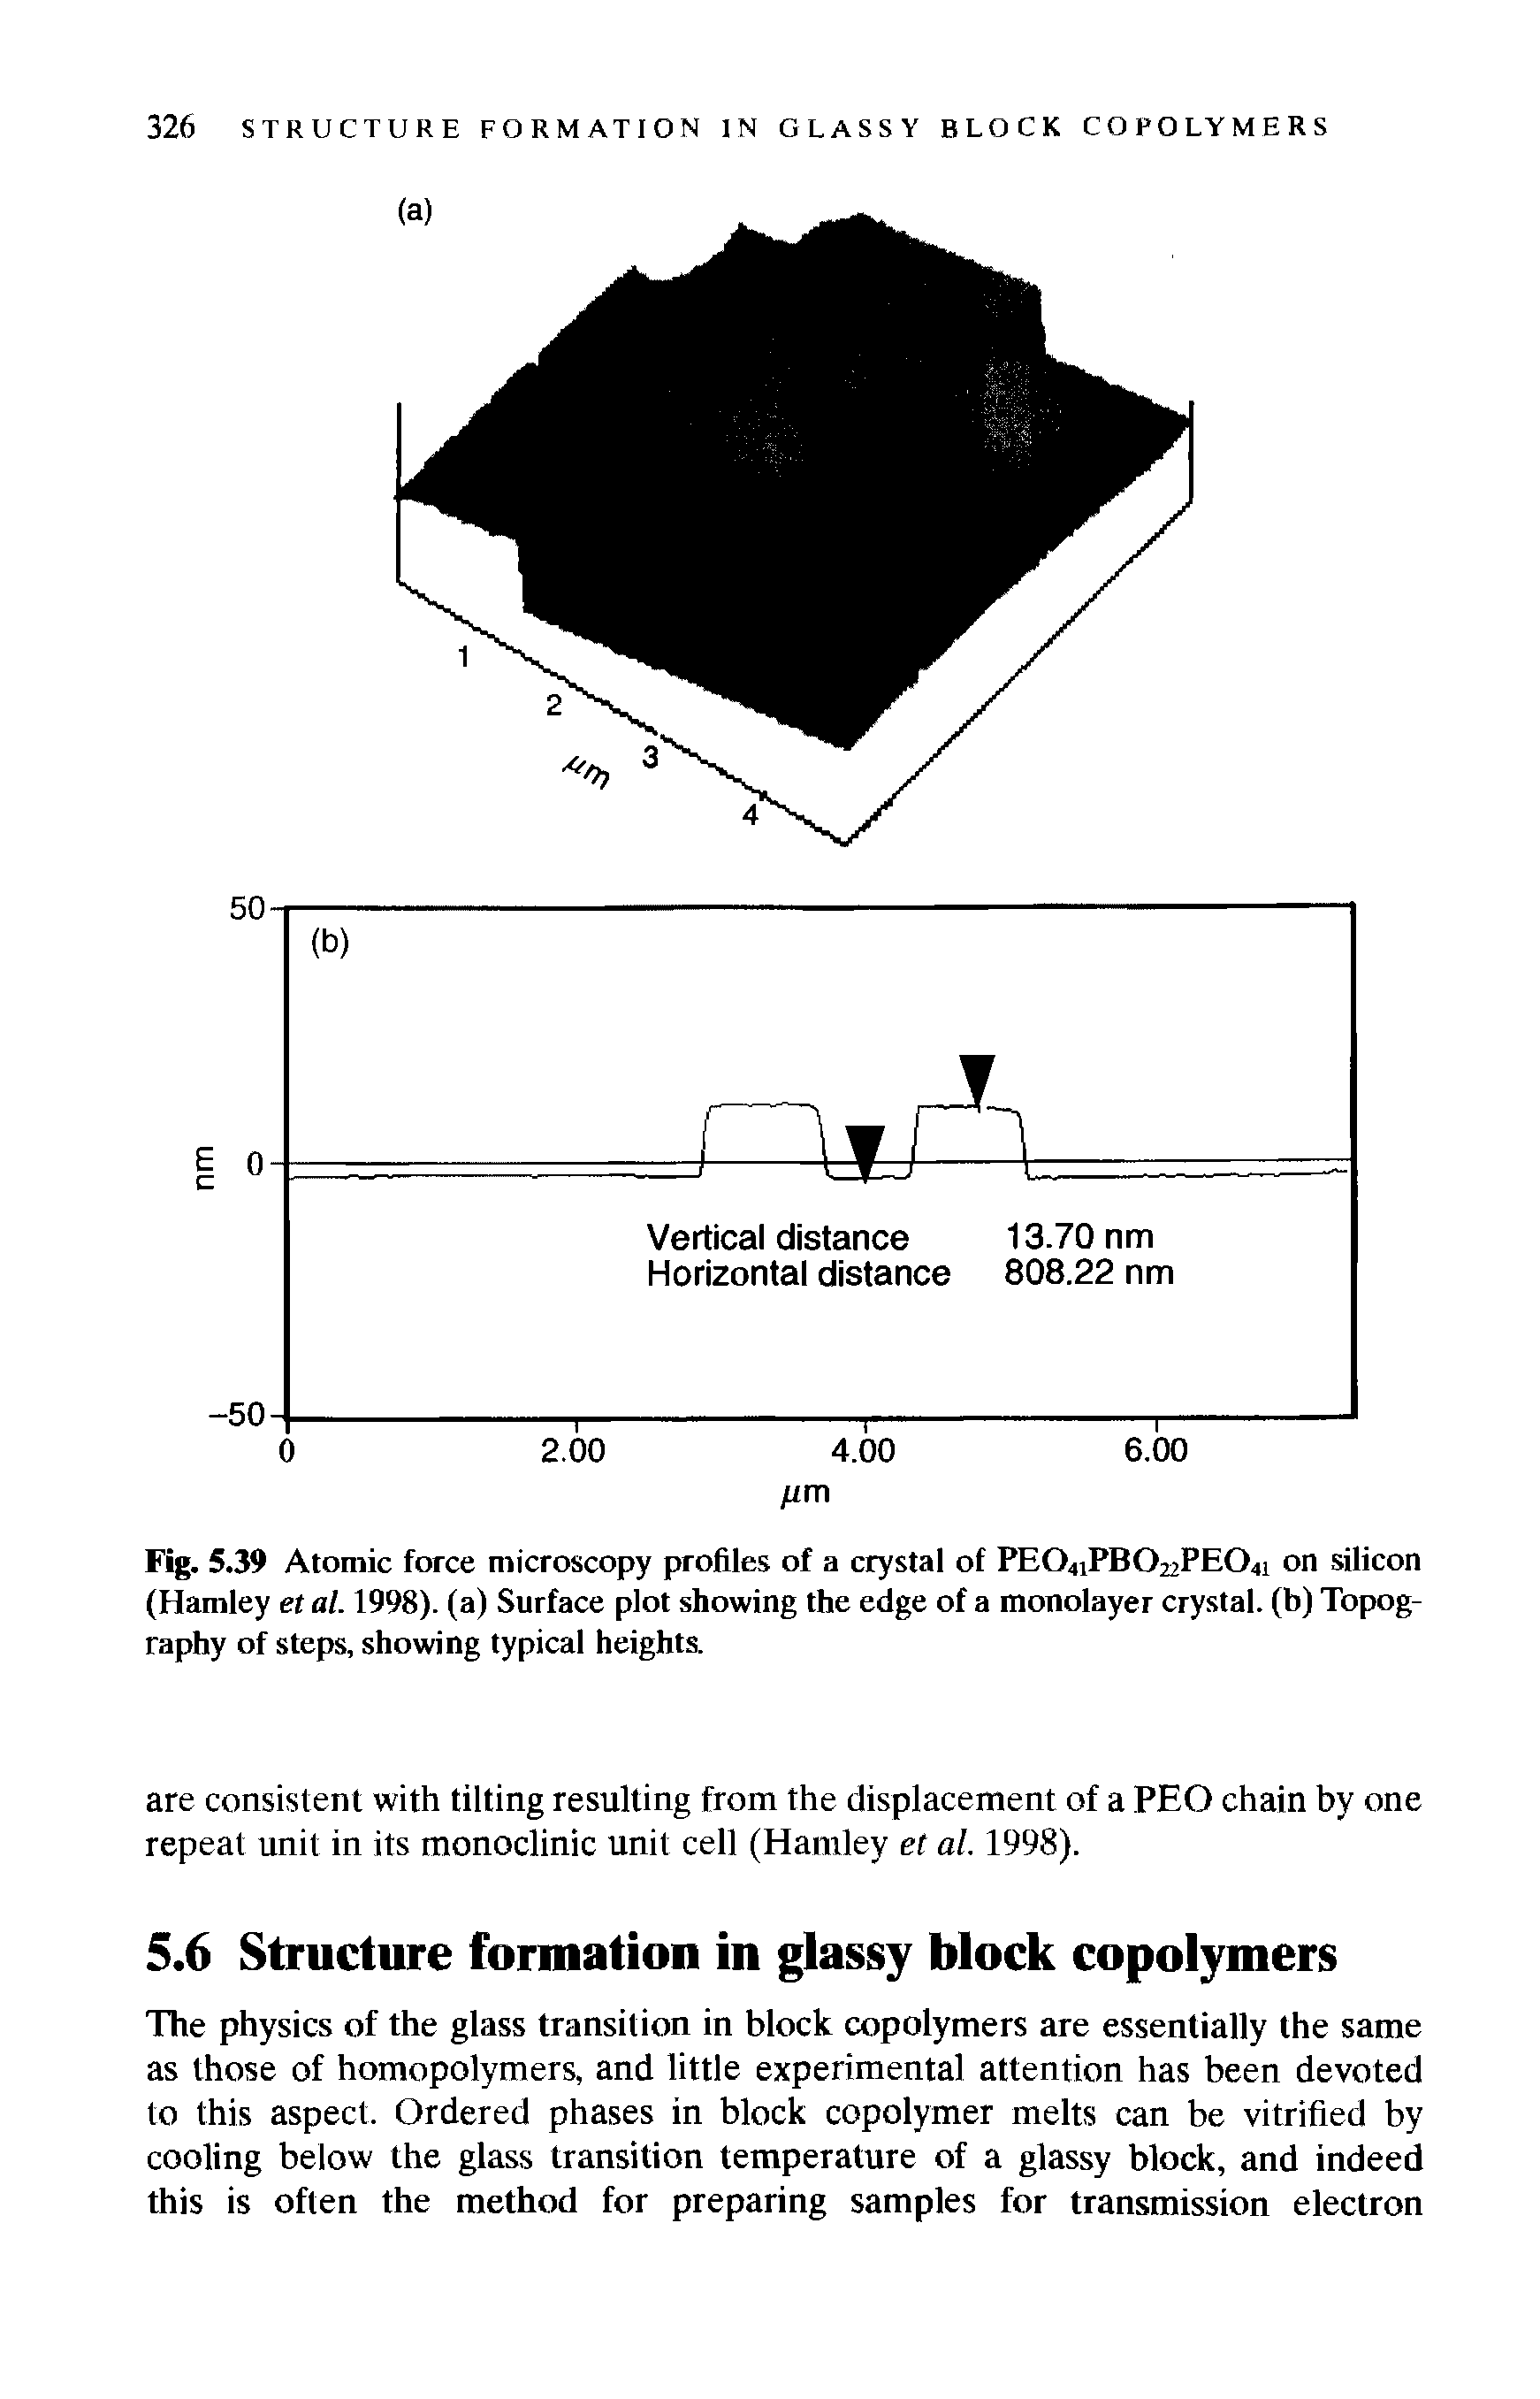 Fig. 5.39 Atomic force microscopy profiles of a crystal of PEO41PBO22PEO41 on silicon (Hamley et al. 1998). (a) Surface plot showing the edge of a monolayer crystal, (b) Topography of steps, showing typical heights.